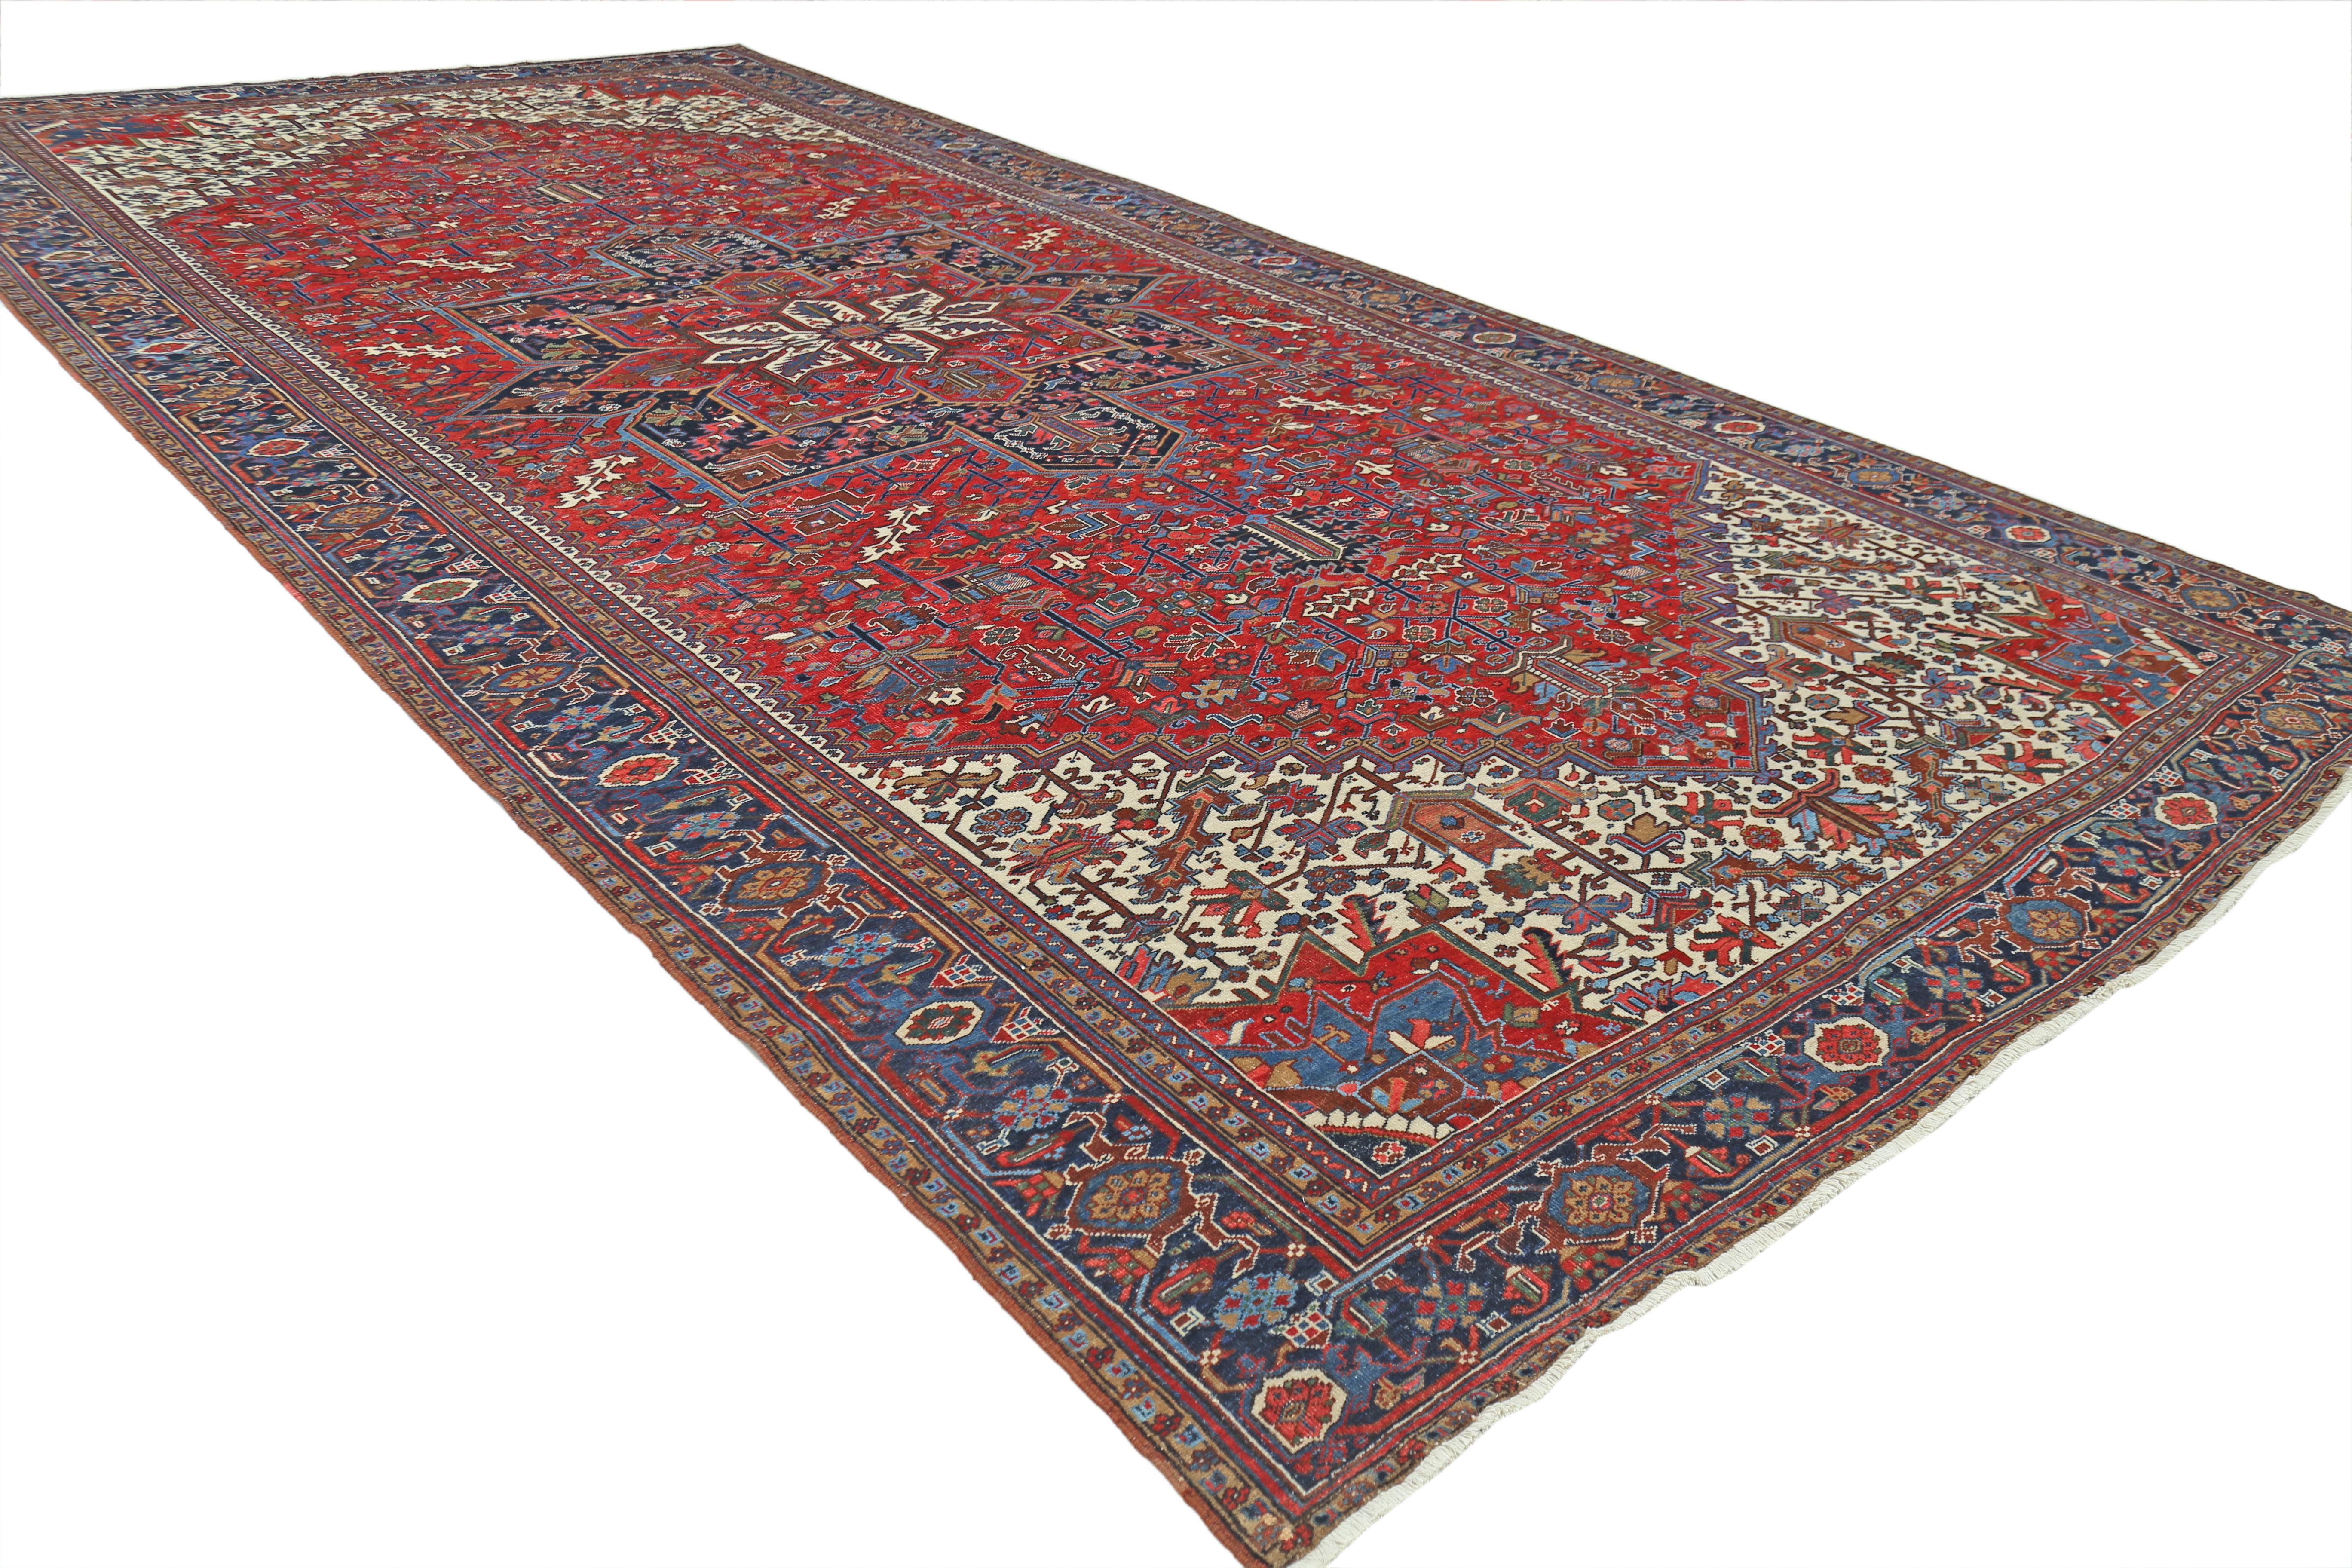 A stunning Semi Antique Persian Heriz Rug that orignates from Iran in the early 20th century. This beautiful hand-knotted piece is in excellent condition considering it’s rich history. 